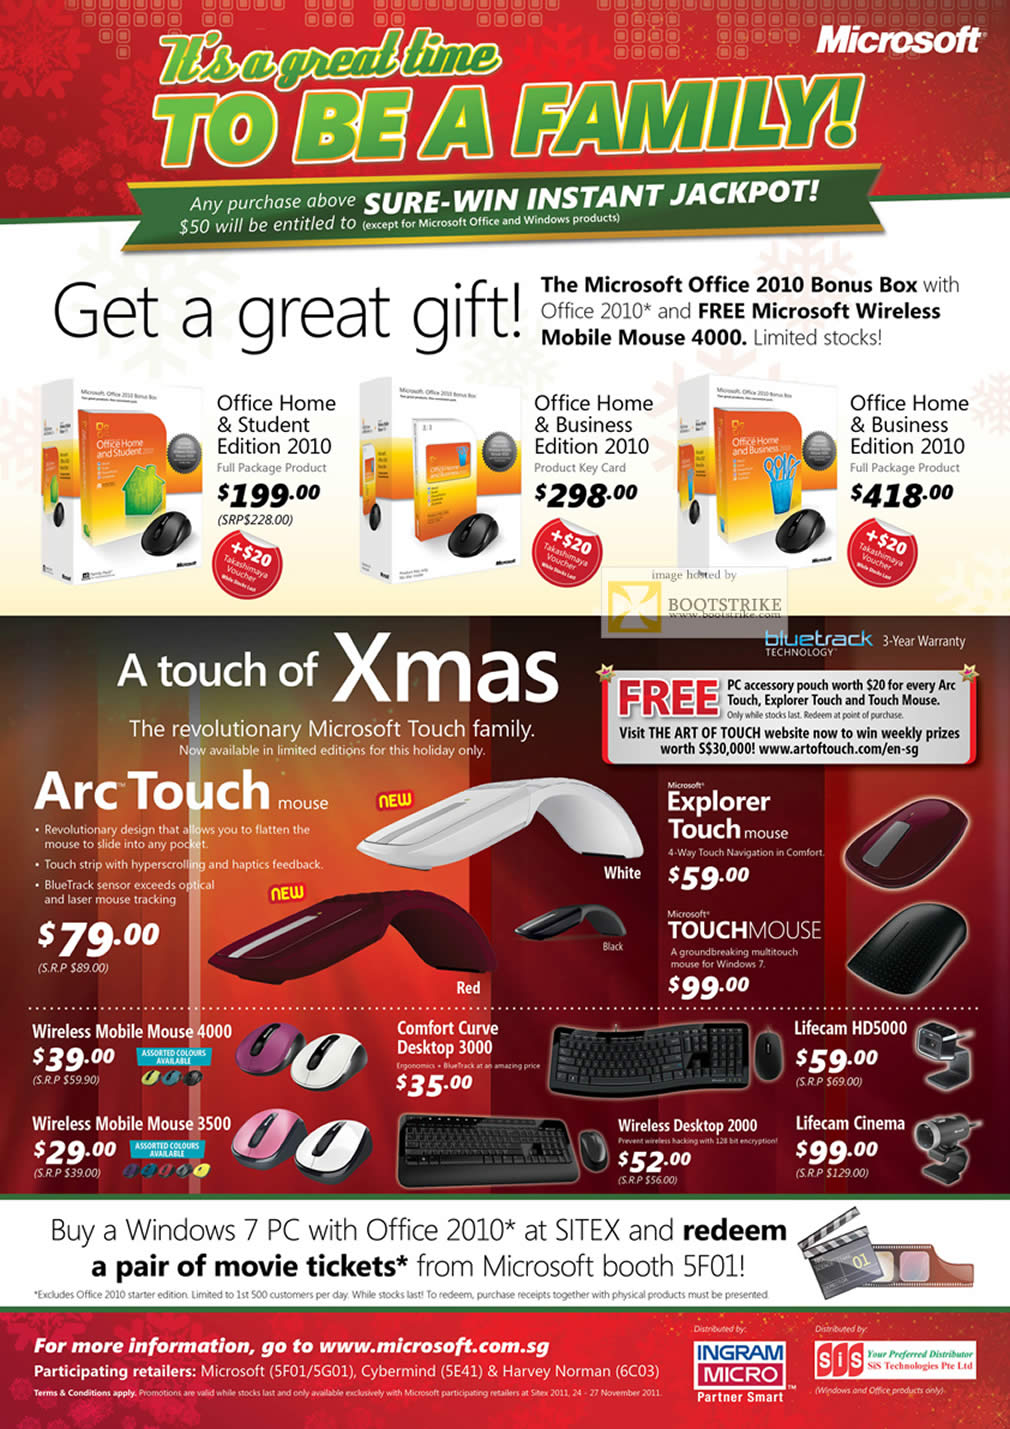 SITEX 2011 price list image brochure of Microsoft Office, Arc Touch Mouse, Explorer Touch, Touch, Wireless Mobile Mouse 4000, 3500, Comfort Curve Desktop 3000 Keyboard, Lifecam HD5000 Webcam, Cinema, Desktop 2000